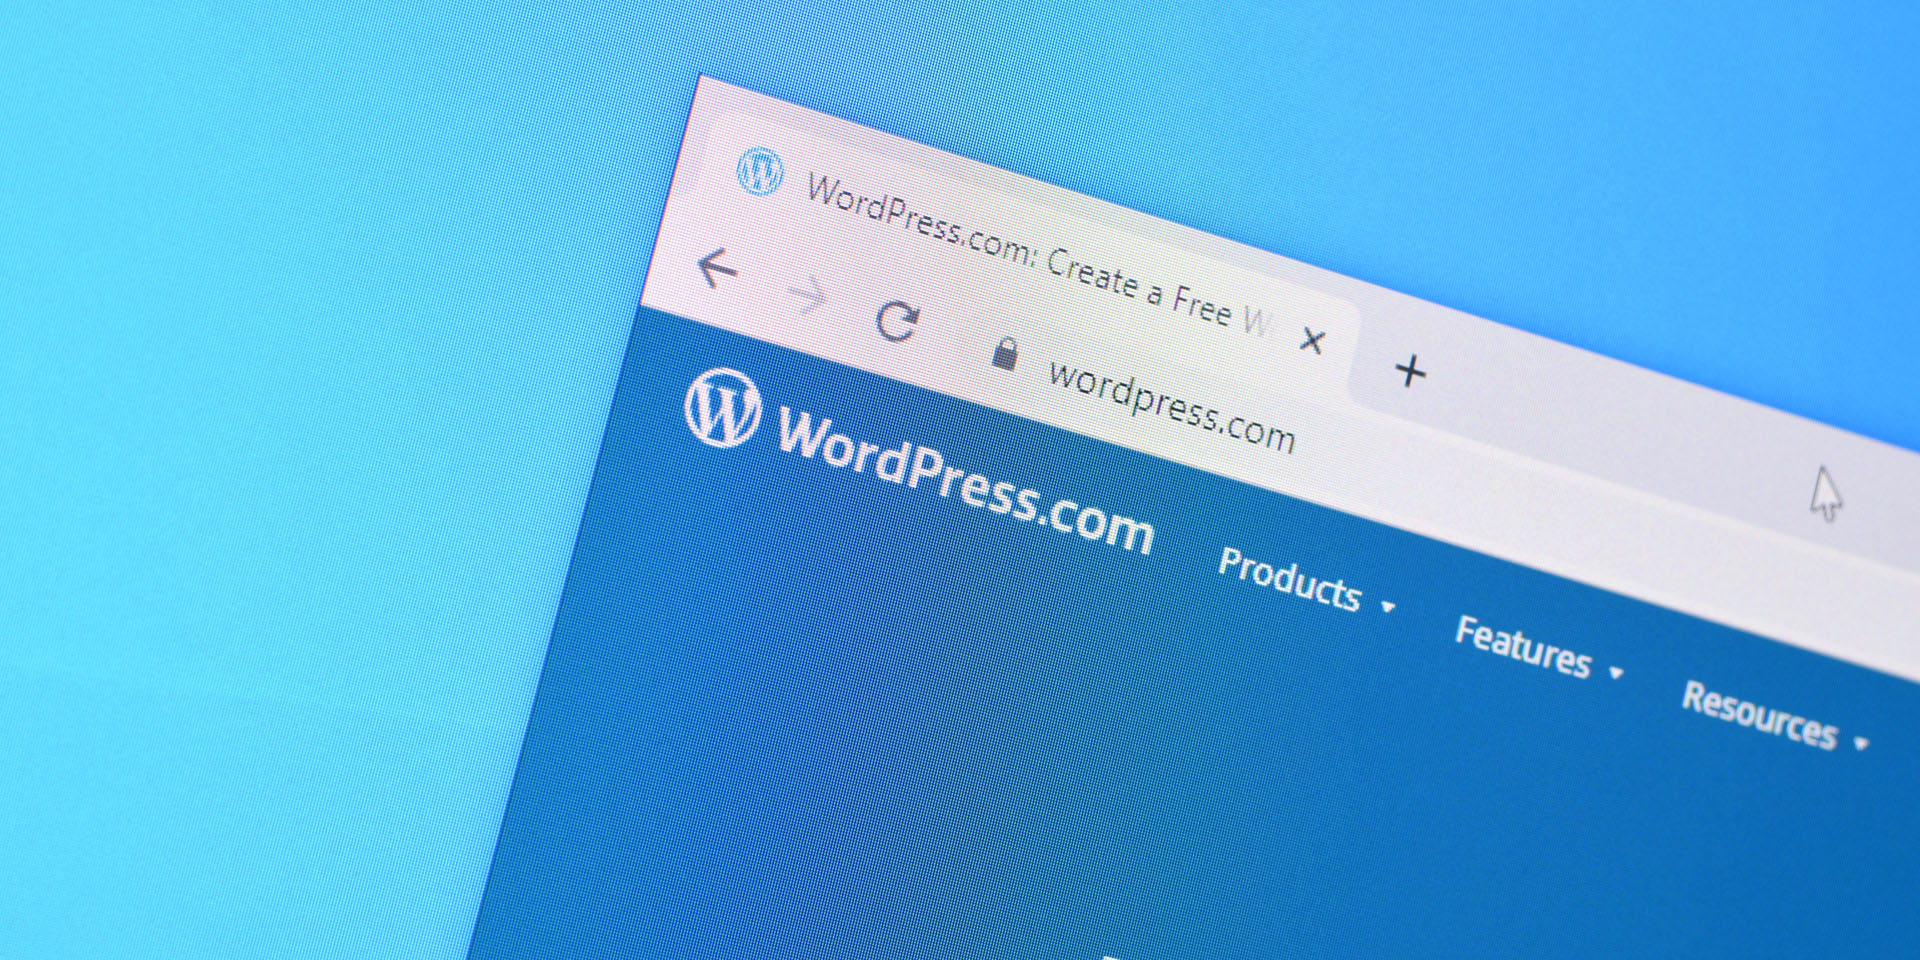 Why Use WordPress for Your New Website